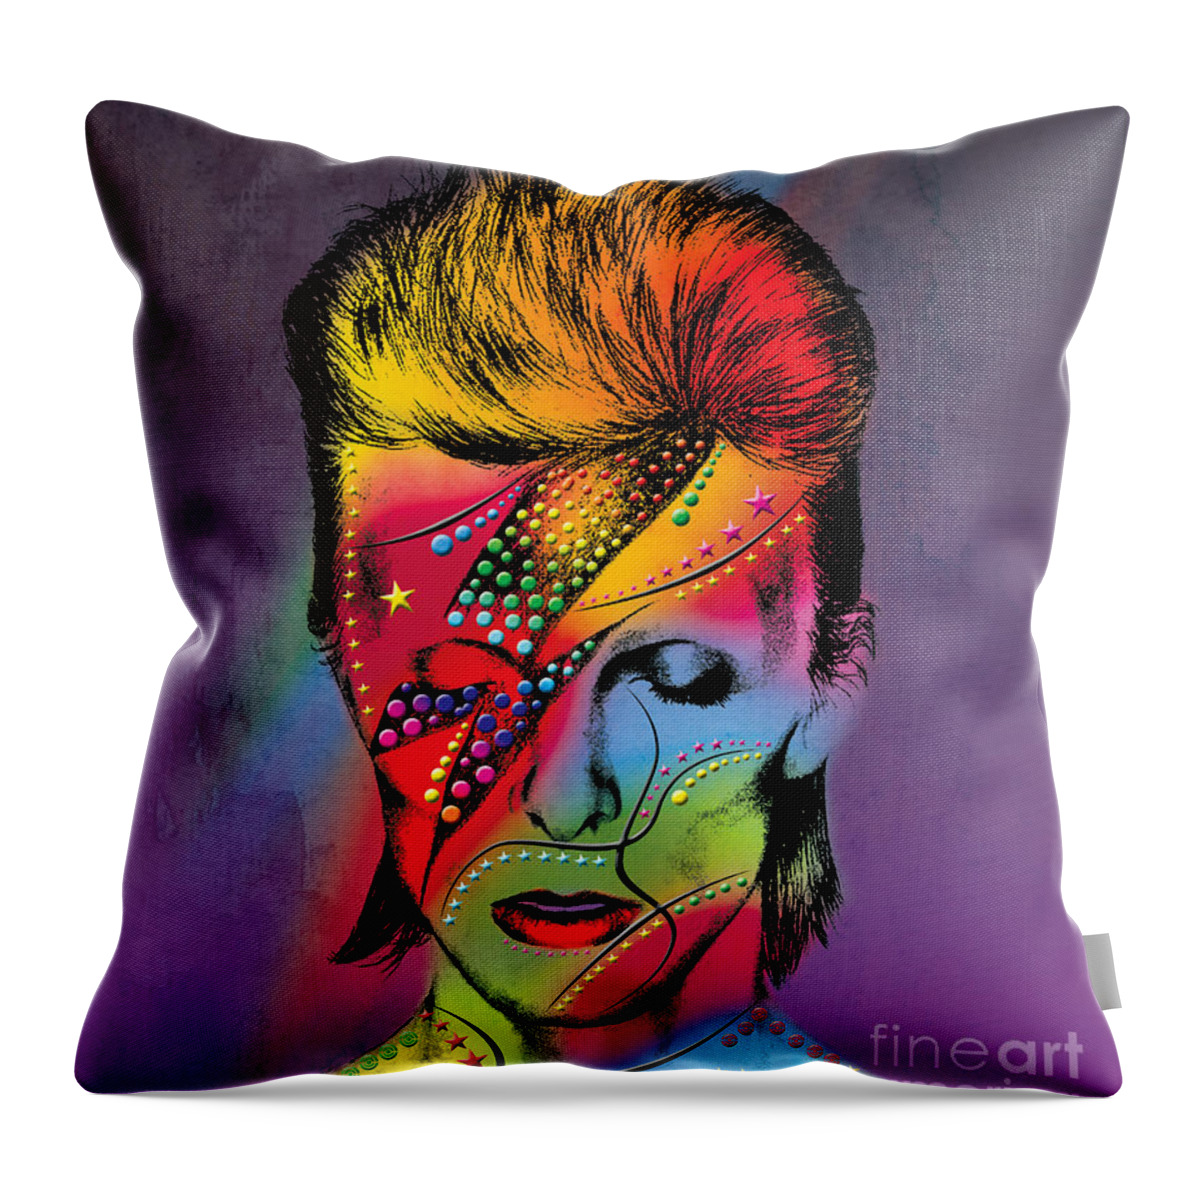 David Bowie Throw Pillow featuring the digital art David Bowie by Mark Ashkenazi